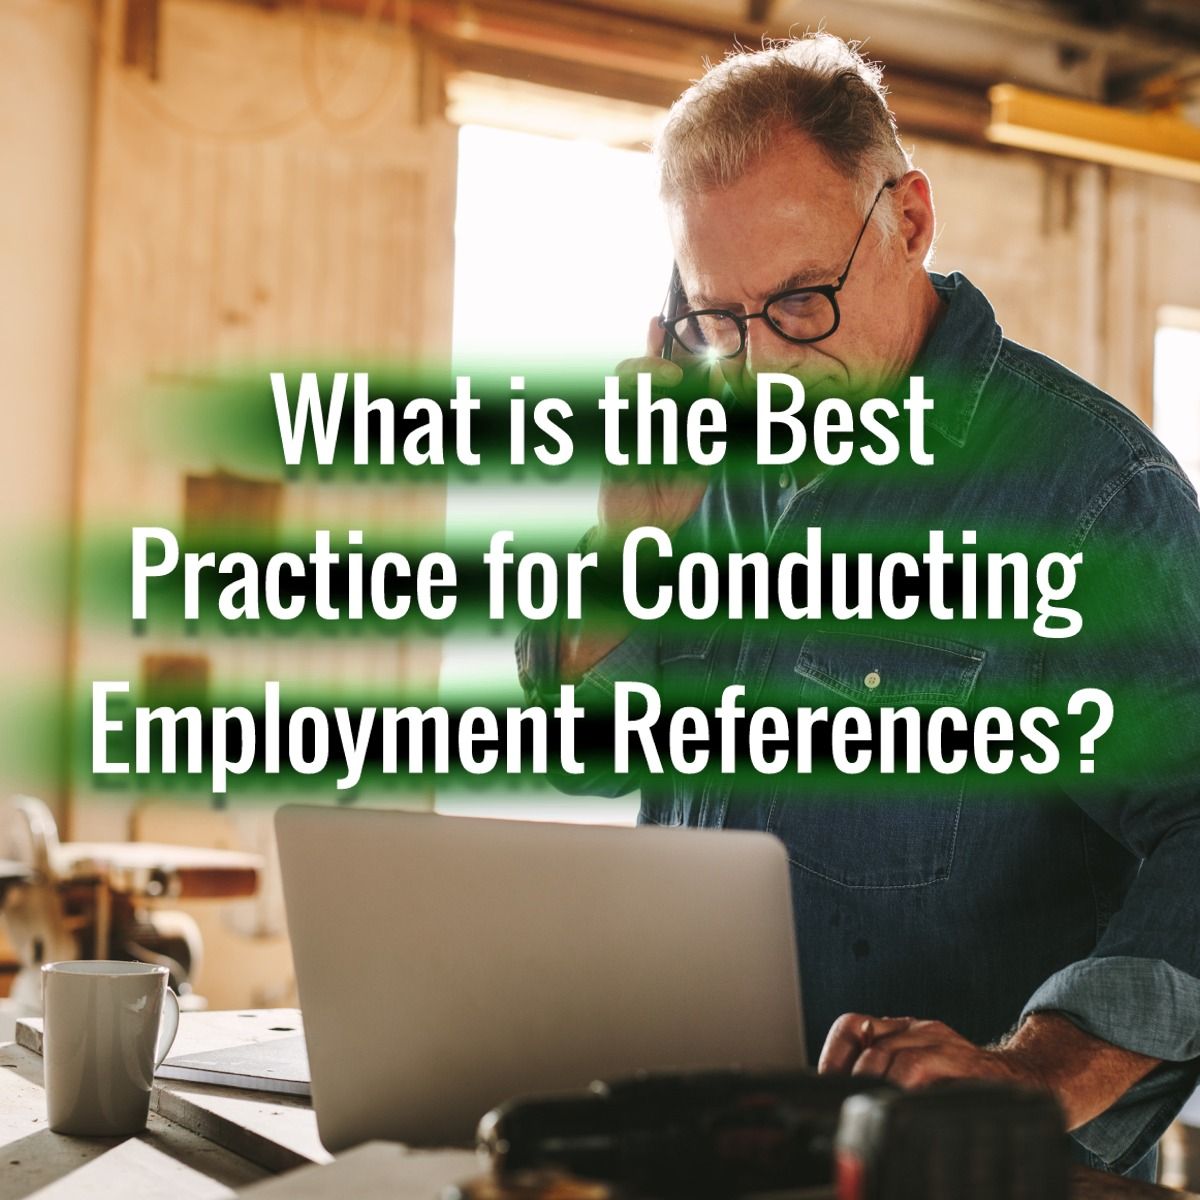 What is the Best Practice for Conducting Employment References?